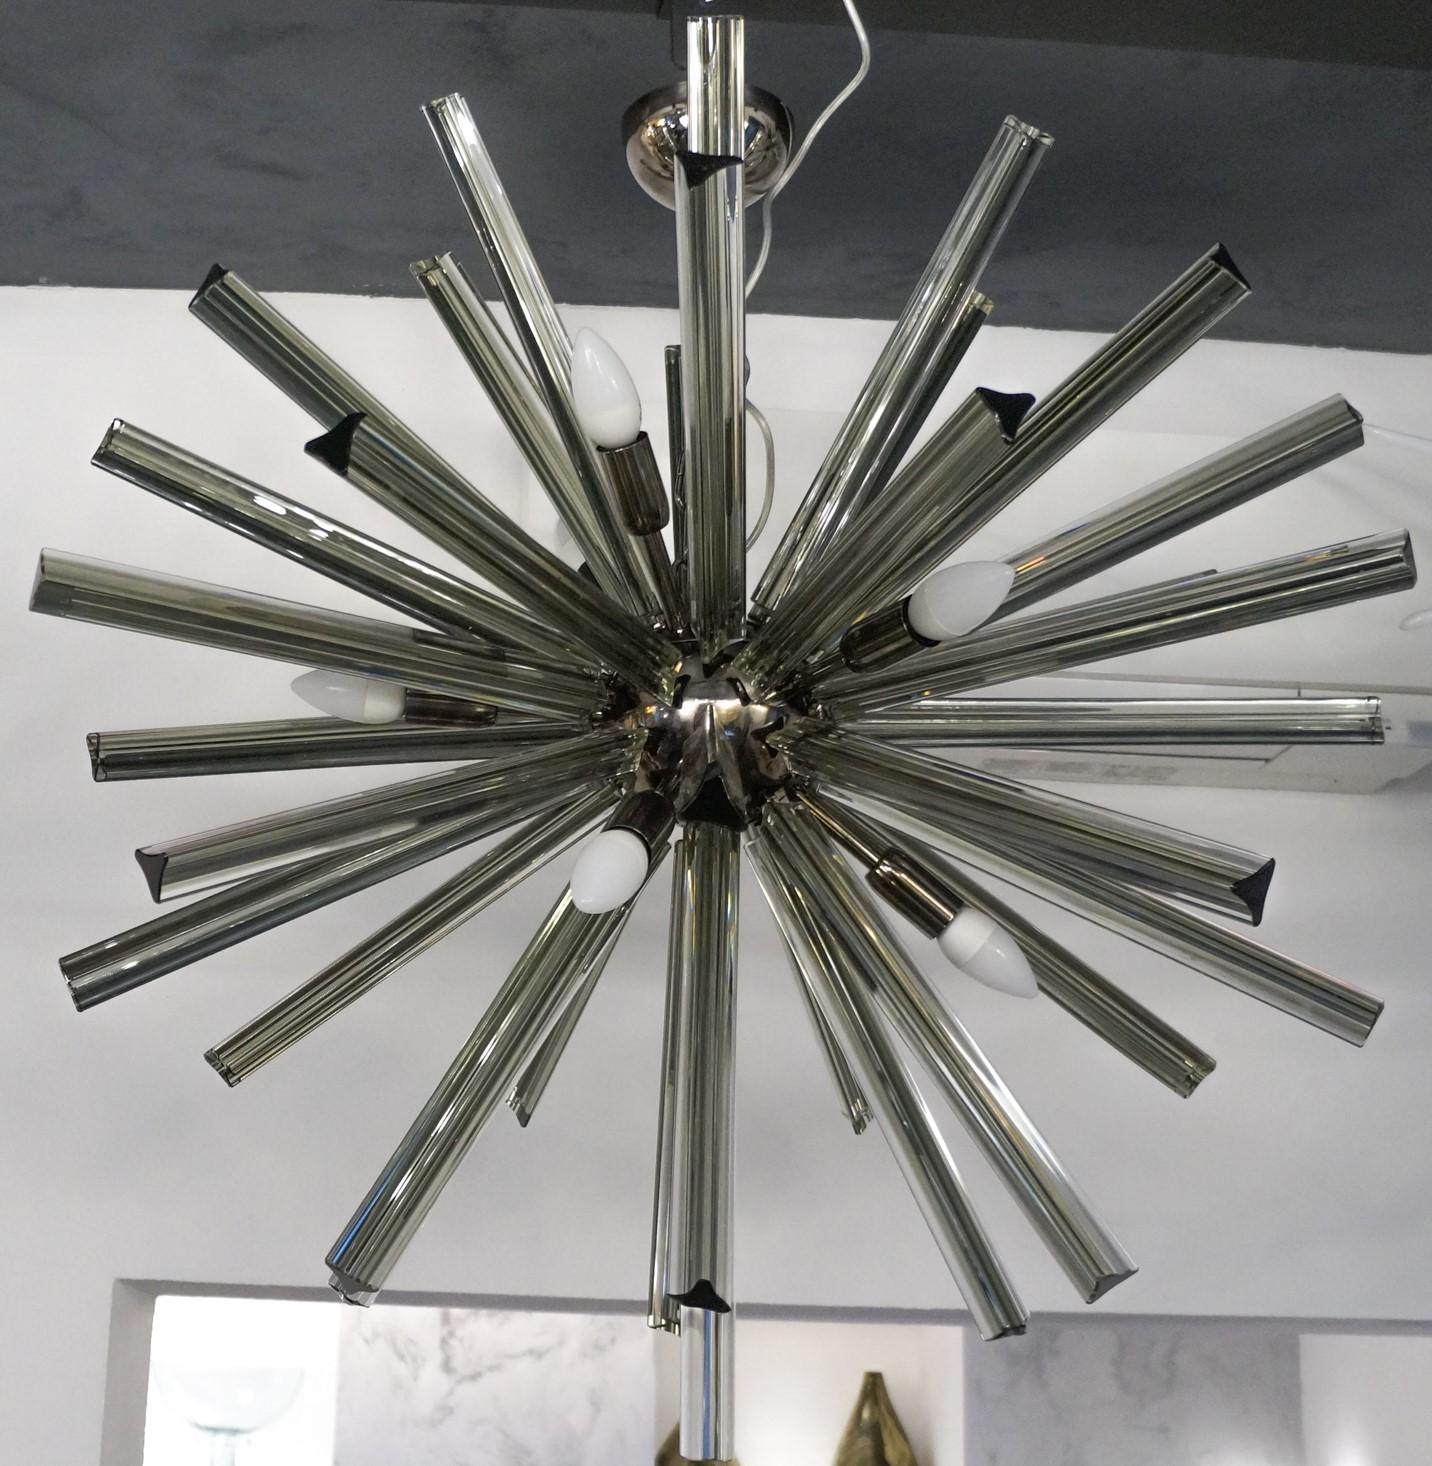 Designed in 1982 by Camer Glass, this chandelier has 43 gray glass elements called “Triedri”.
Perfect for a modern space, the chandelier reach the diameter of 80 cm and is lighted by 9 Bubs E14 that create a comfortable atmosphere lighting the